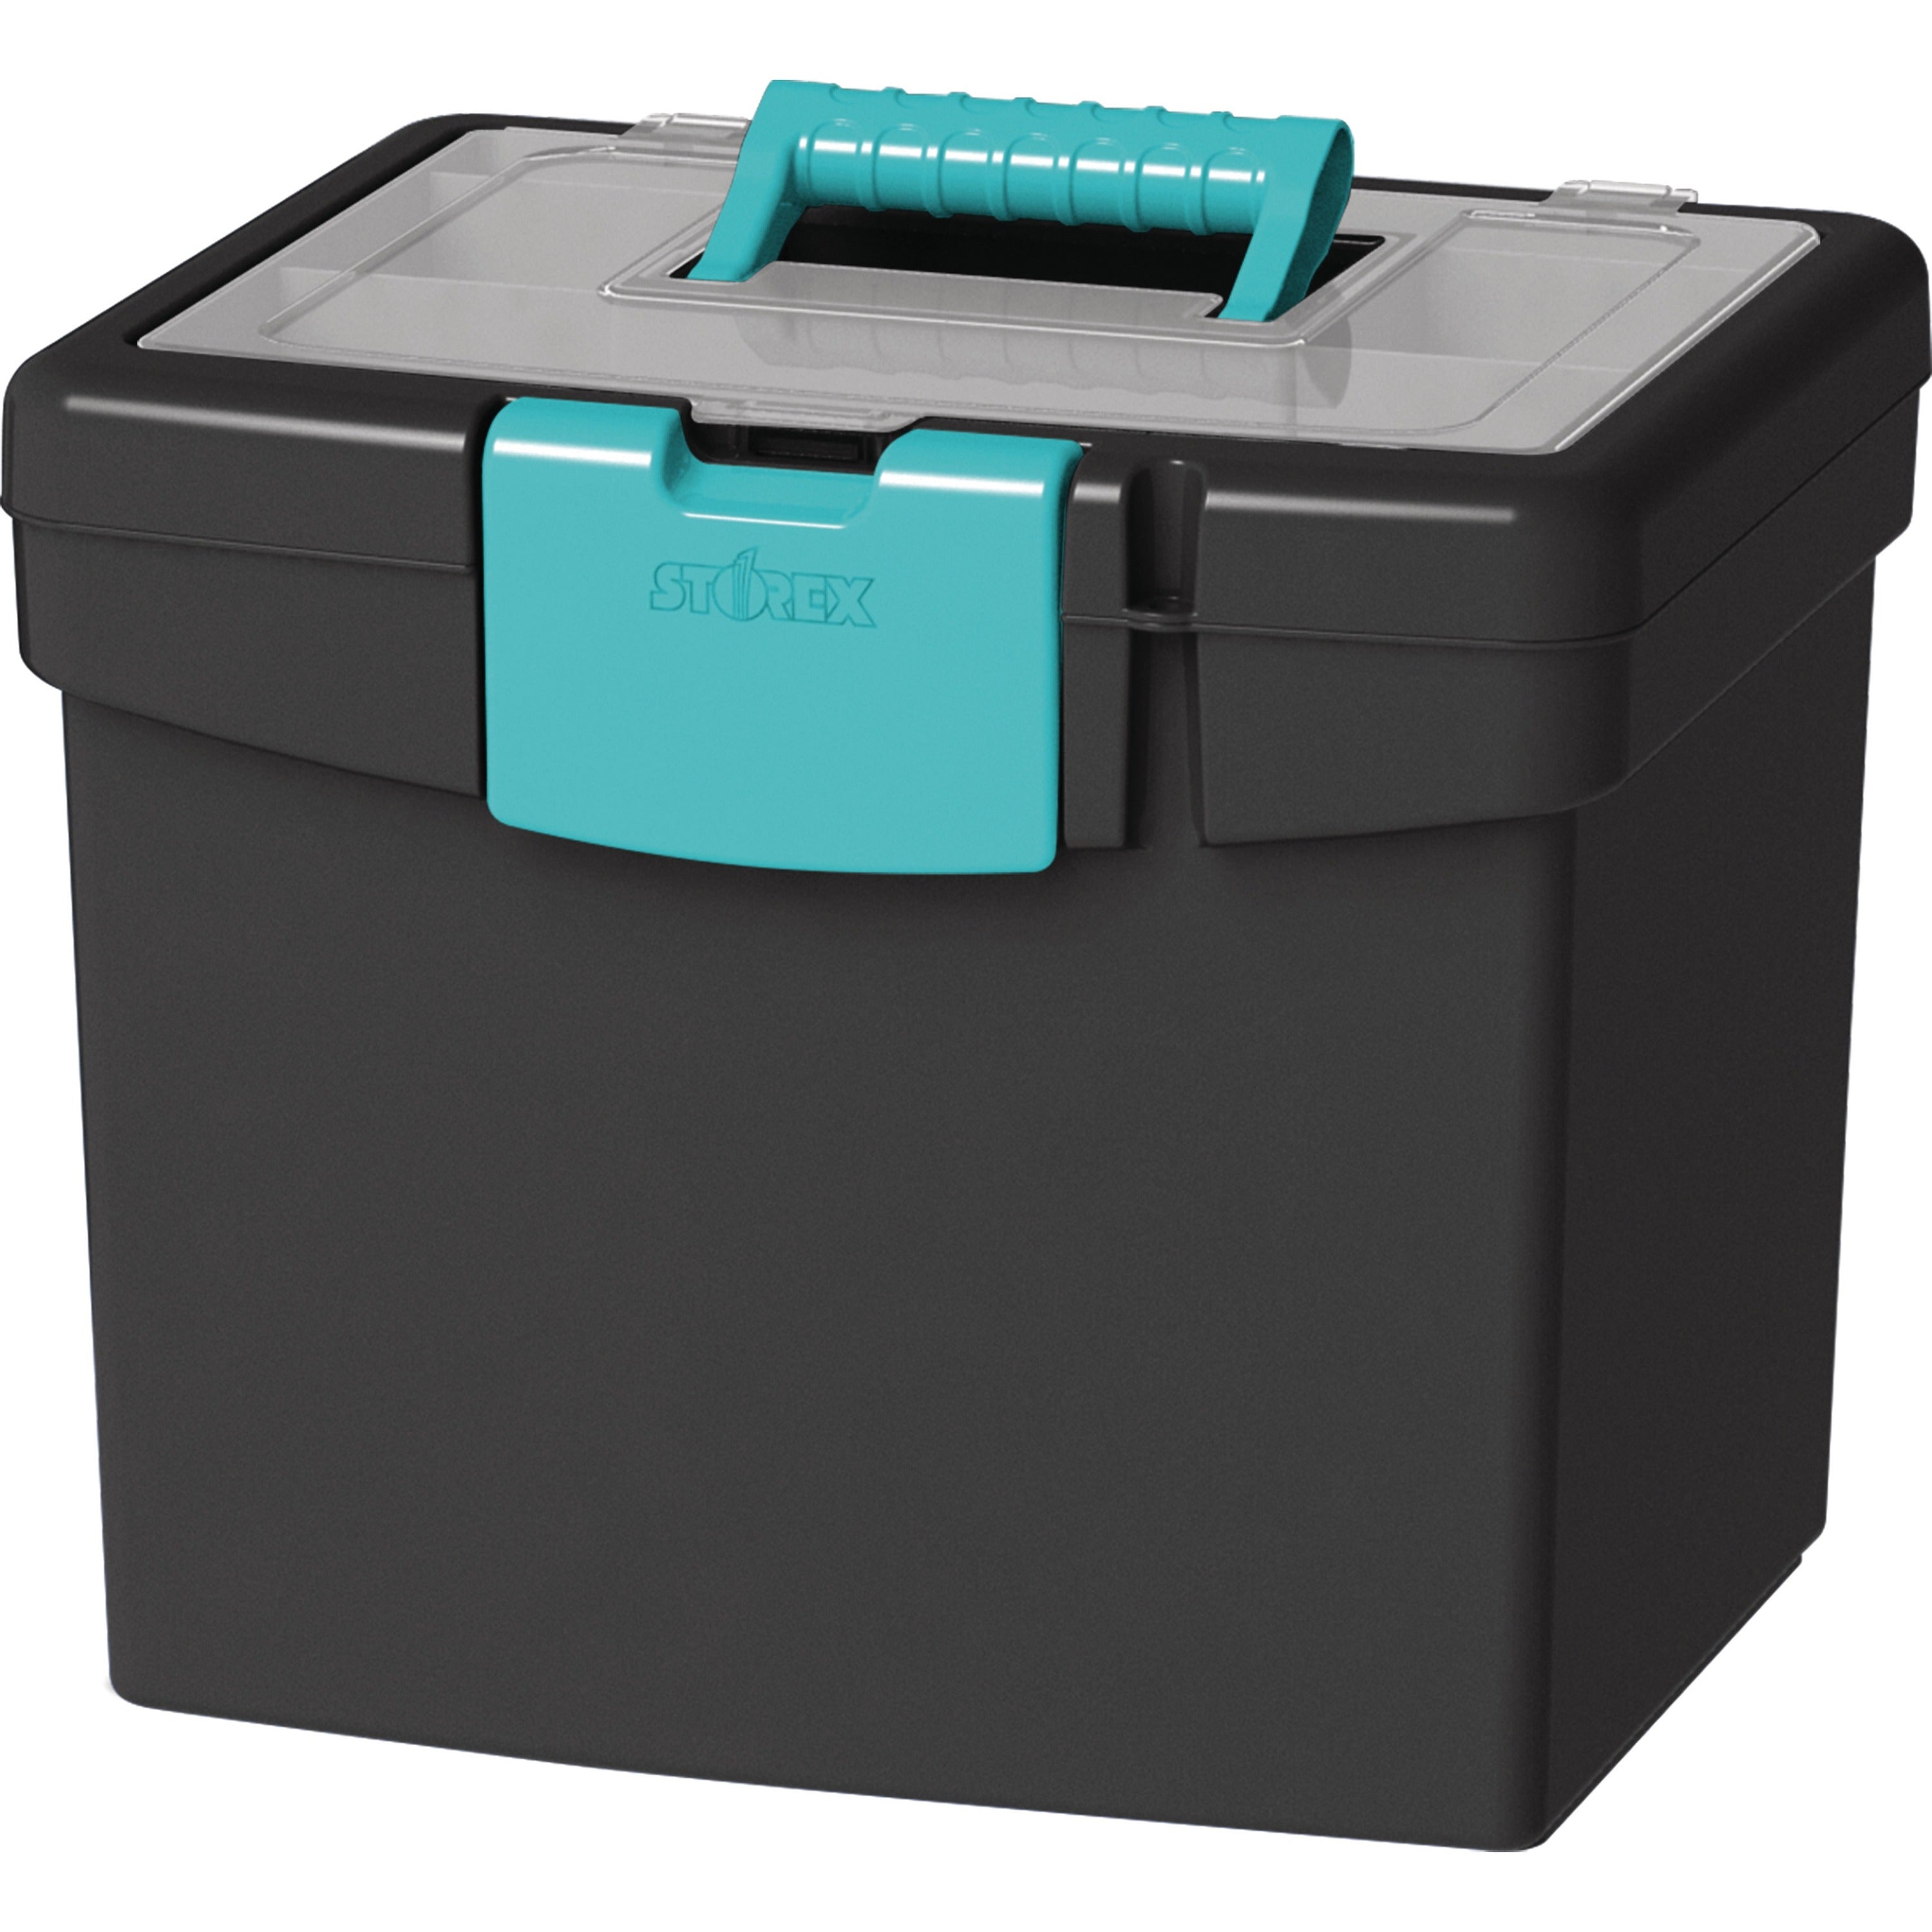 storex-file-storage-box-with-xl-storage-lid-external-dimensions-109-length-x-133-width-x-11-height-30-lb-media-size-supported-letter-850-x-11-clamping-latch-closure-plastic-black-teal-for-file-folder-1-each_stx61414b02c - 1